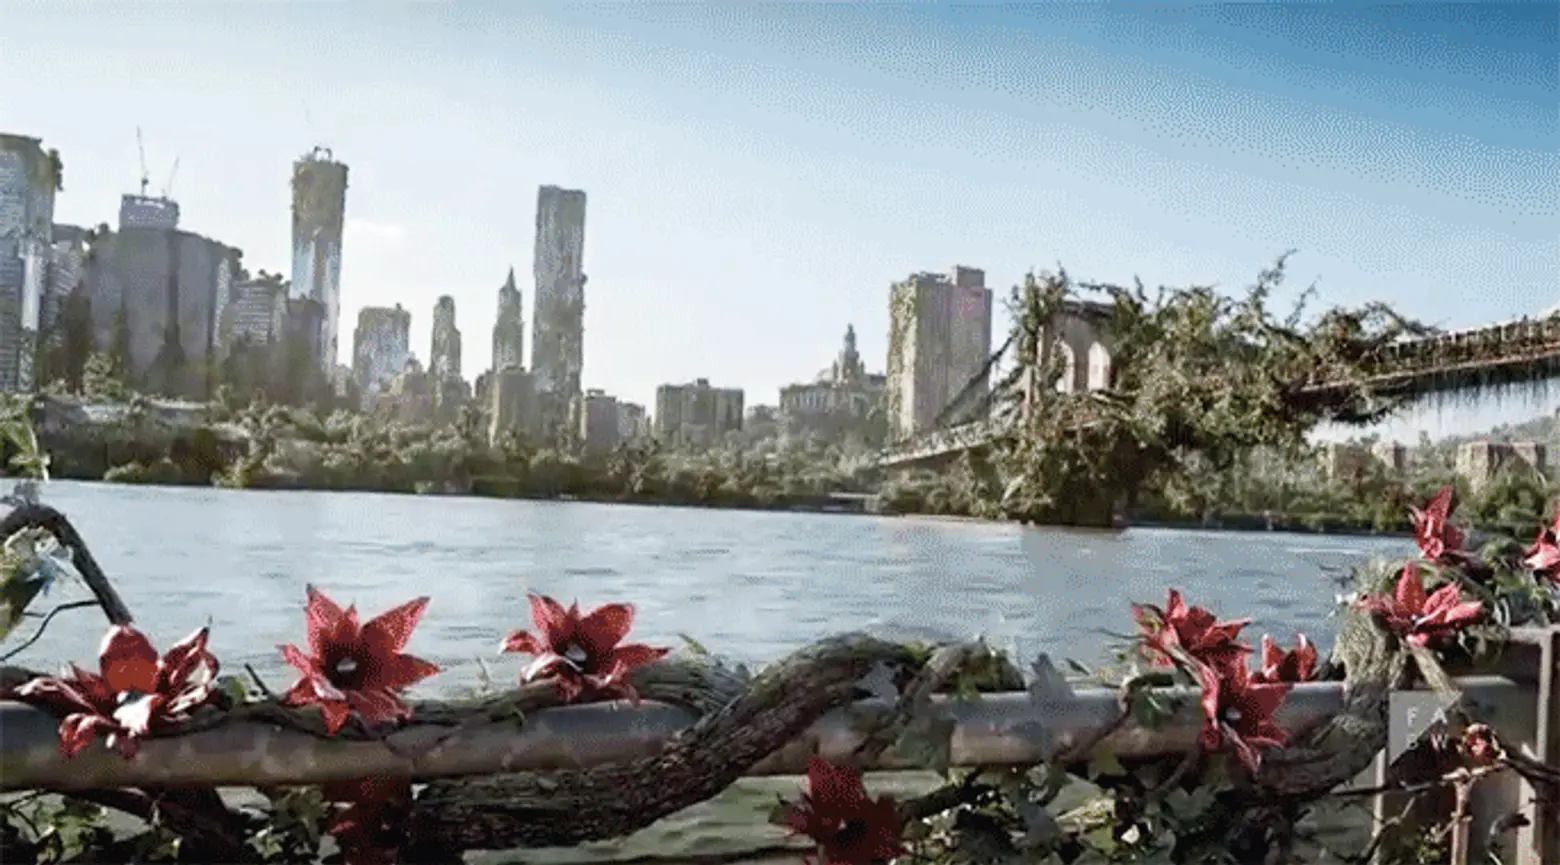 VIDEO: Watch Plants Consume New York in This Beautiful Short Film ‘Wrapped’